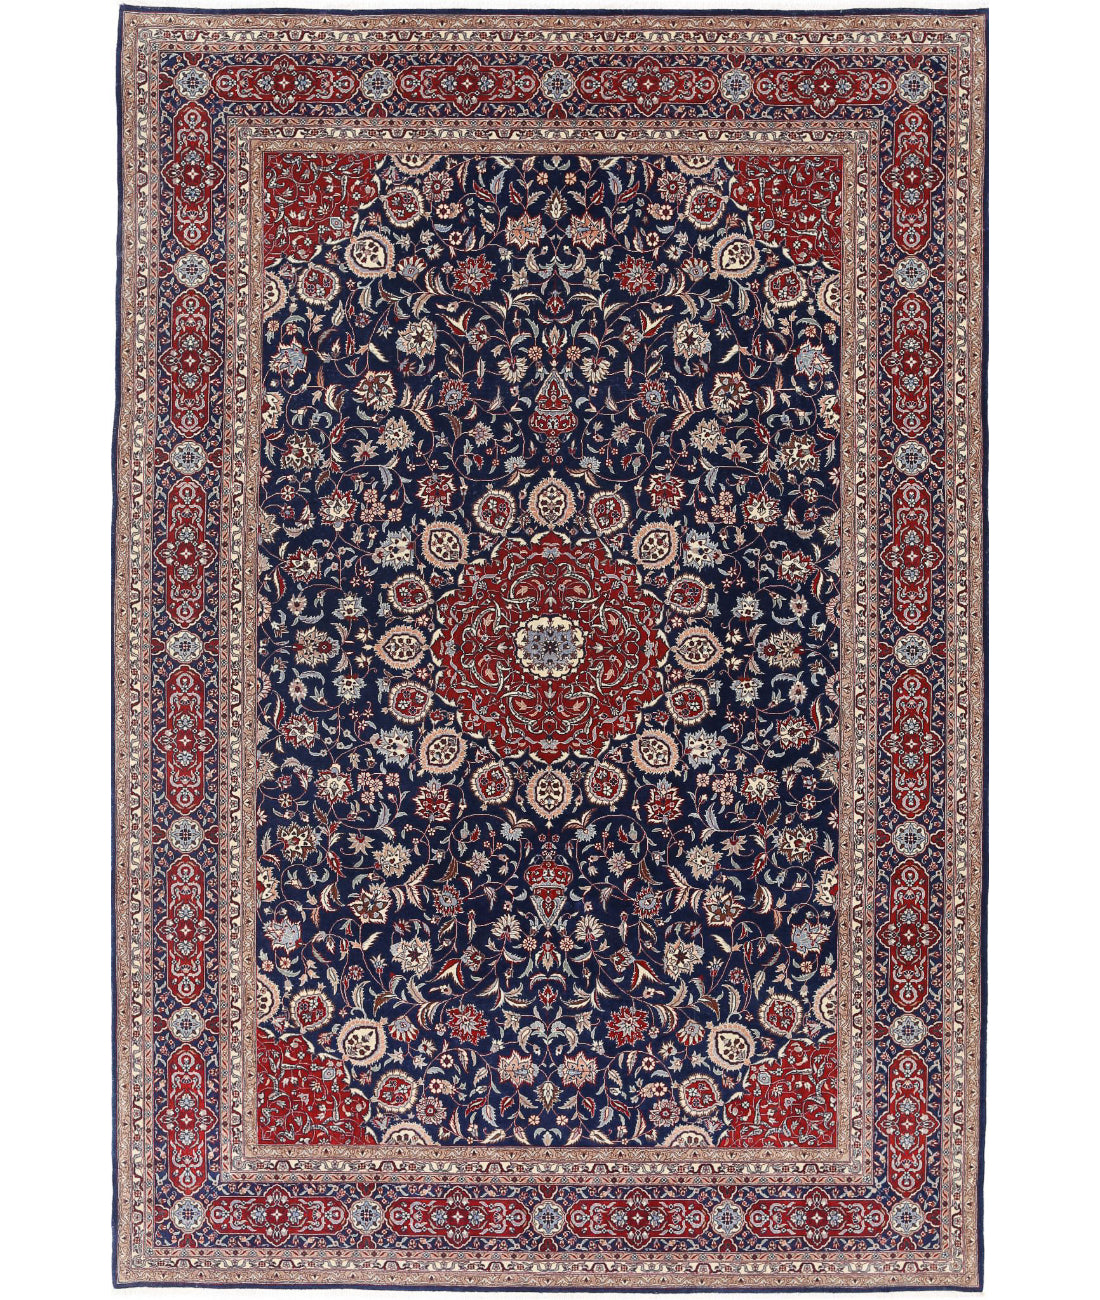 Hand Knotted Heritage Fine Persian Style Wool Rug - 6&#39;8&#39;&#39; x 9&#39;10&#39;&#39; 6&#39;8&#39;&#39; x 9&#39;10&#39;&#39; (200 X 295) / Blue / Red